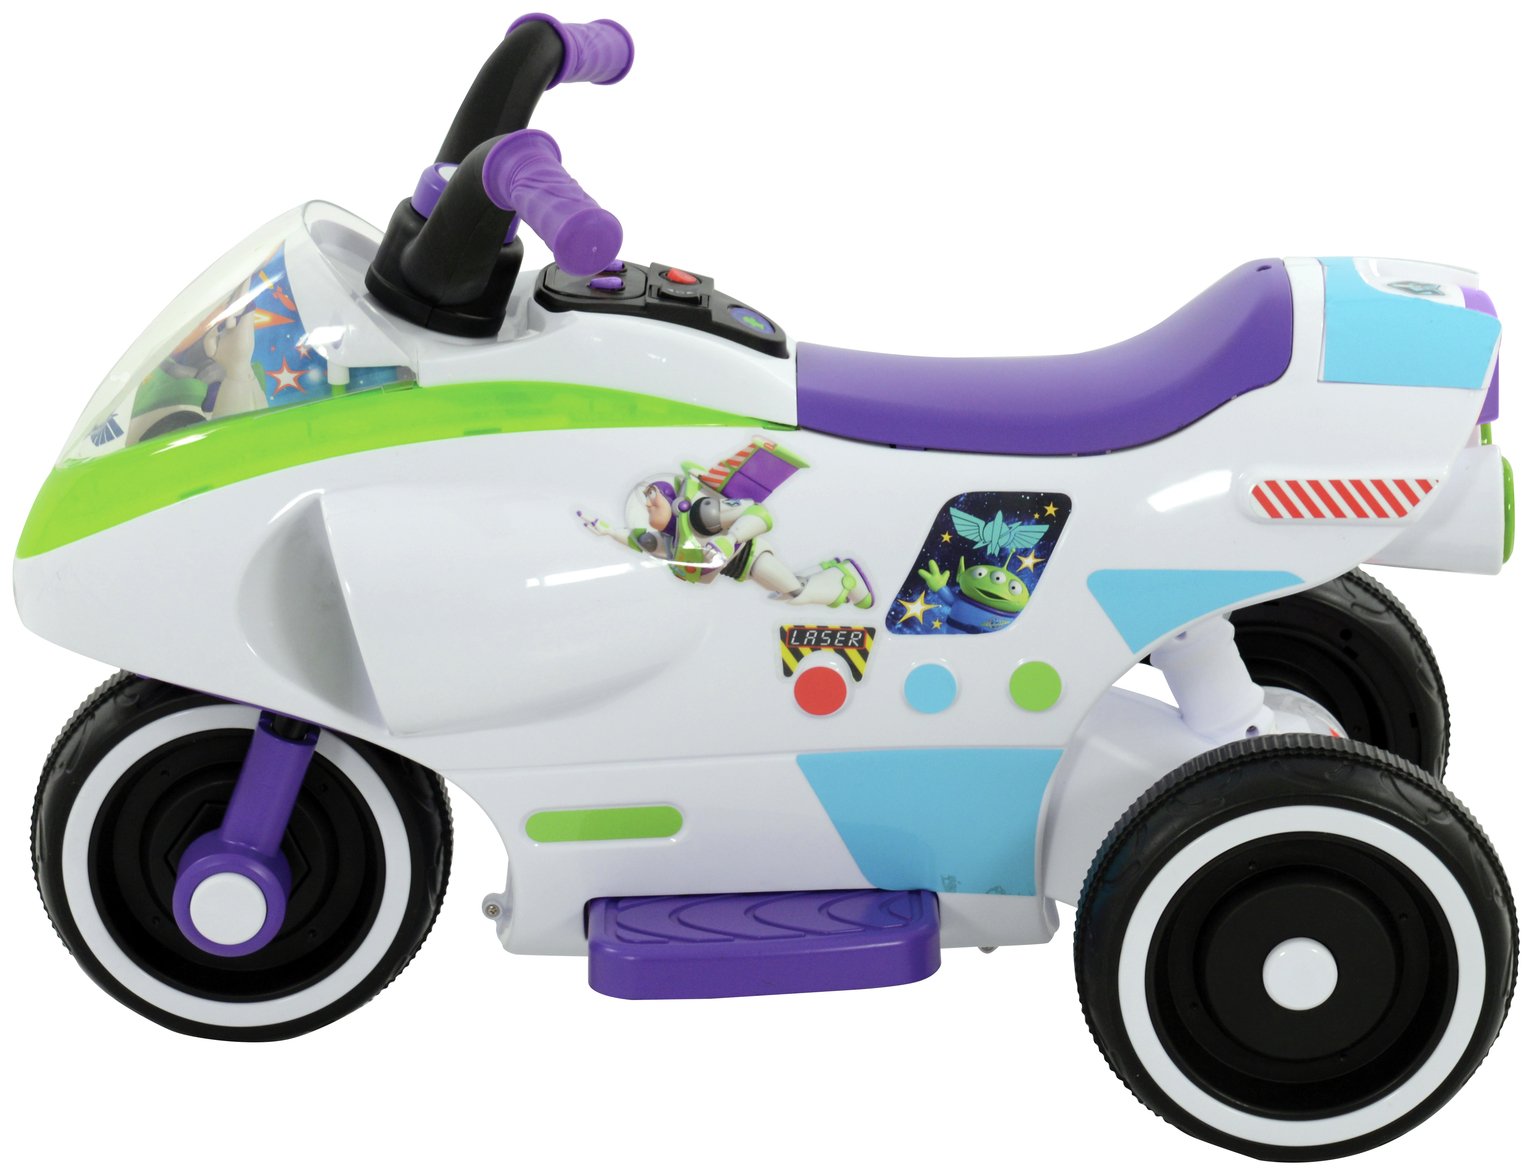 Disney Toy Story Buzz Lightyear 6V Space Cruiser Ride On Review